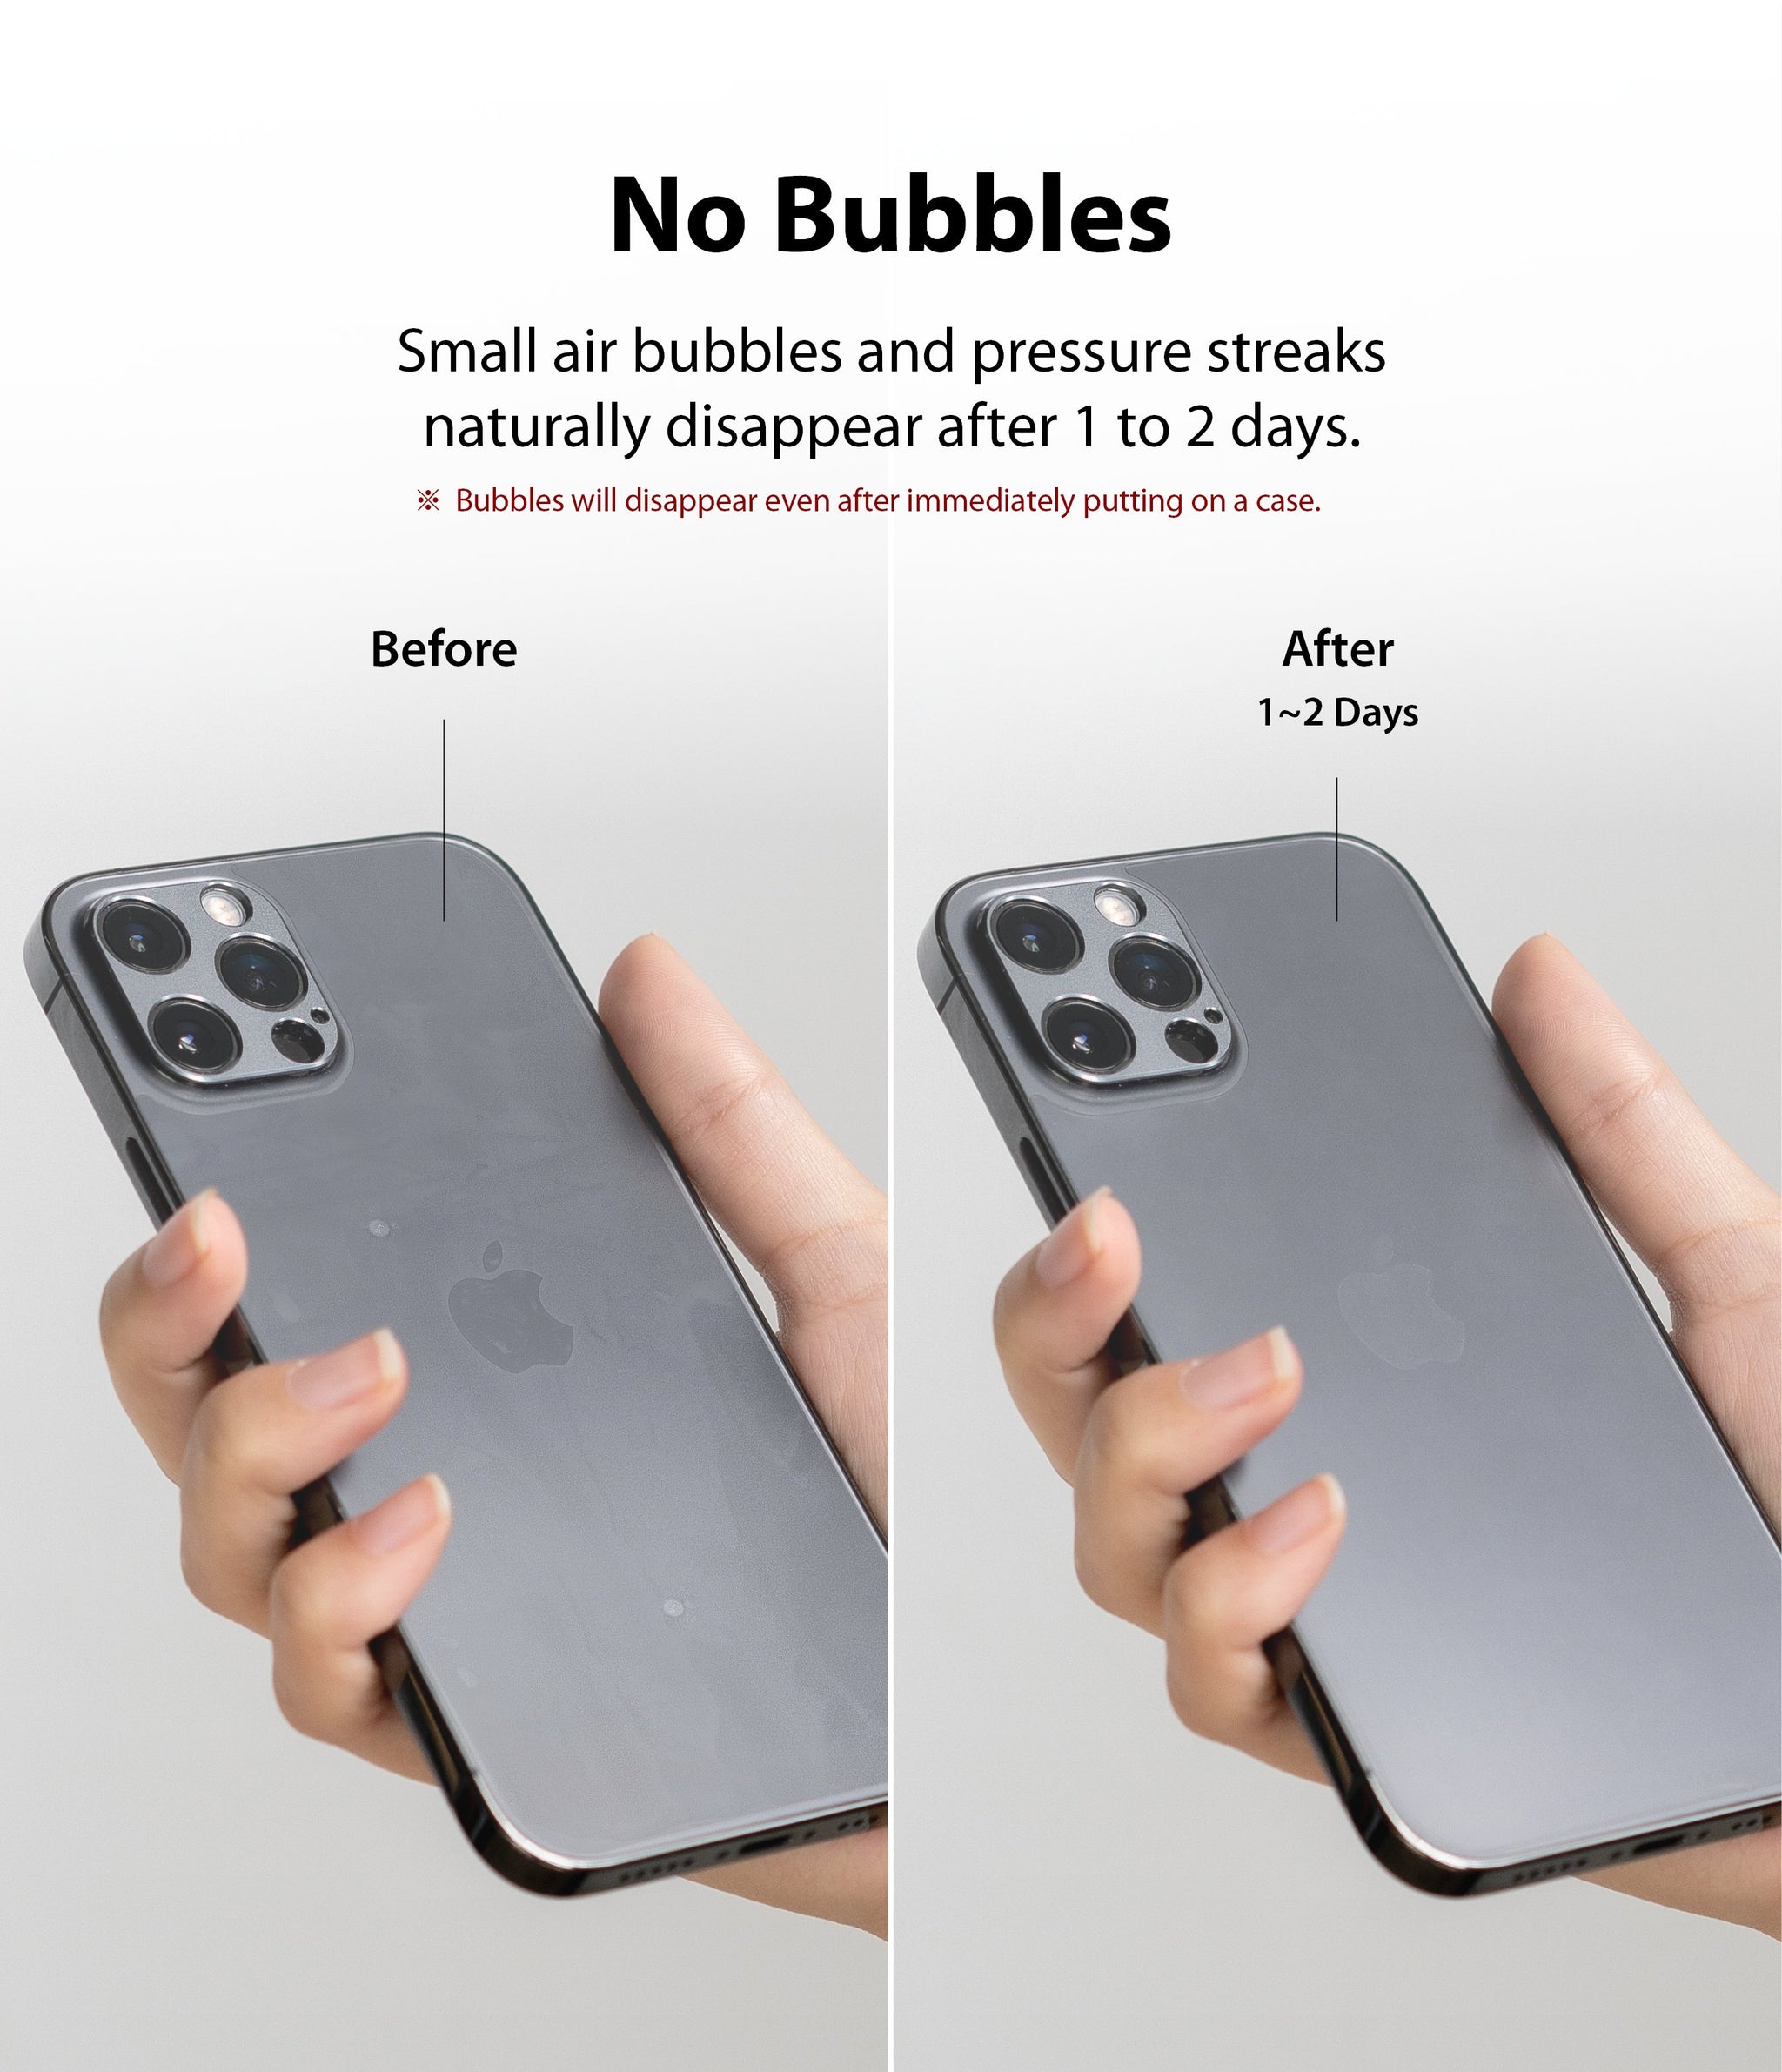 iPhone 13 Back Screen Protector | Invisible Defender - No bubbles. Small air bubbles and pressure streaks naturally disappear after 1 to 2 days. Bubbles will disappear even after immediately putting on a case.